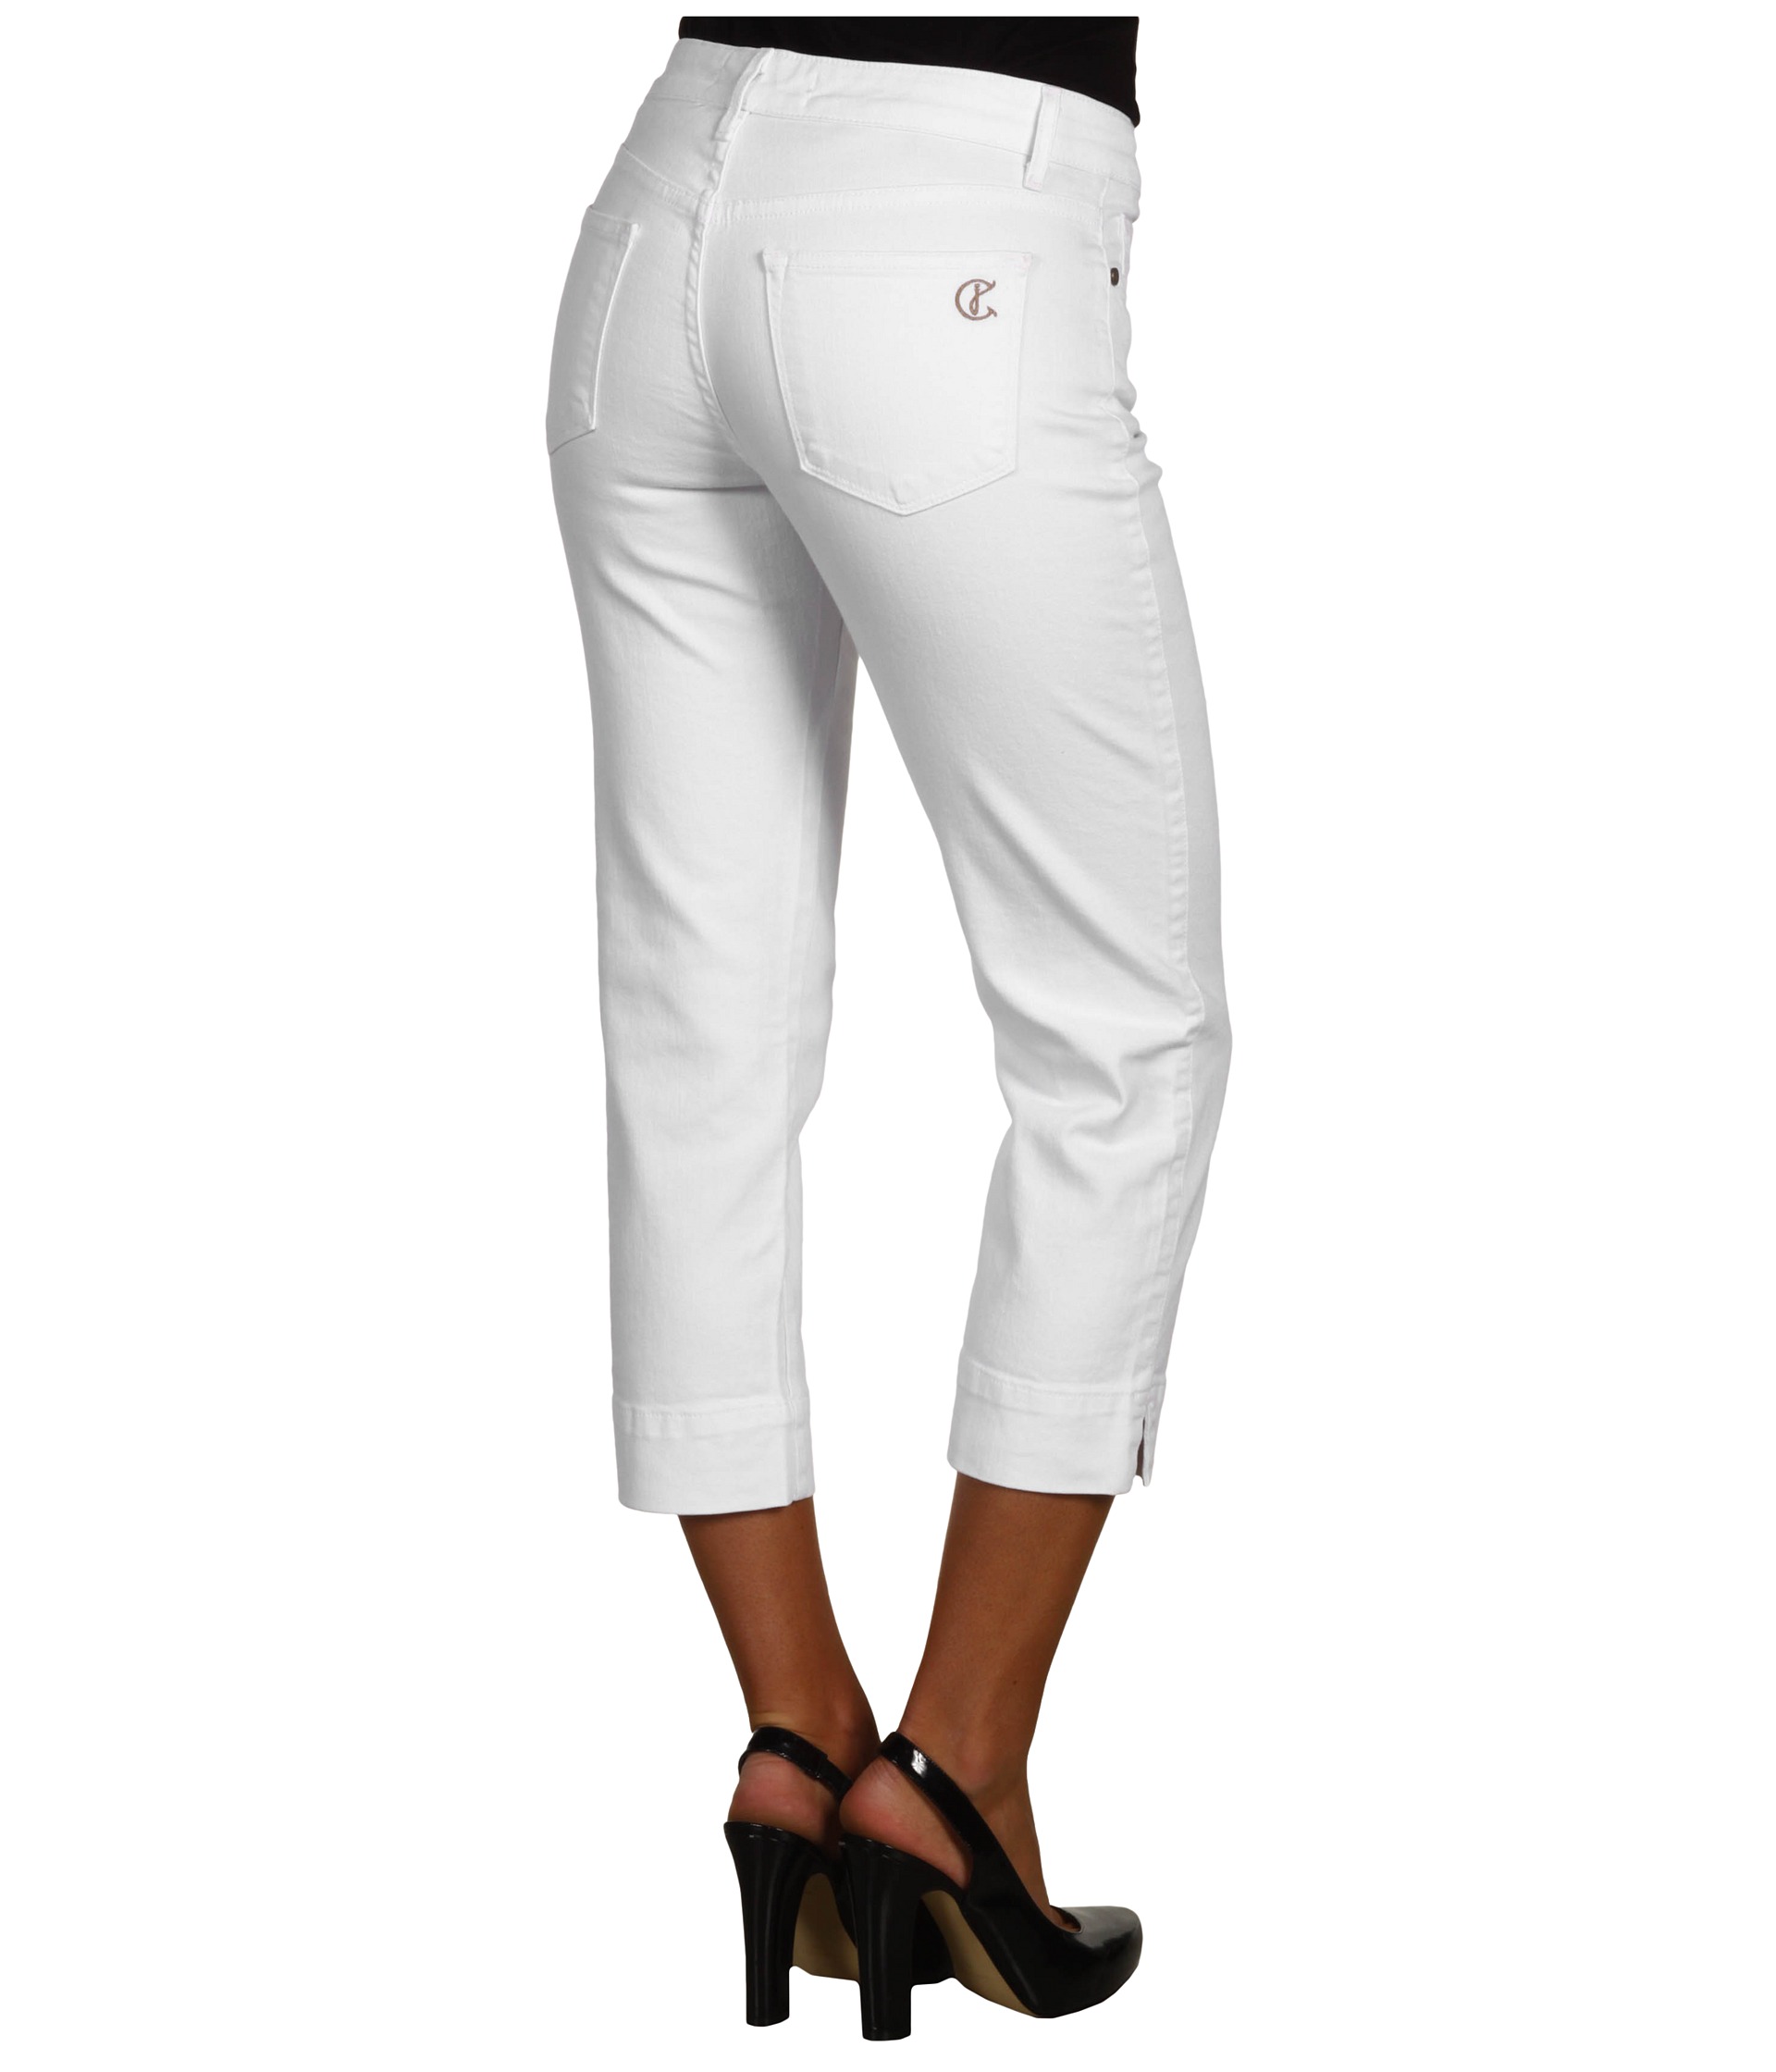 CJ by Cookie Johnson   Mercy Crop Jean in Optic White